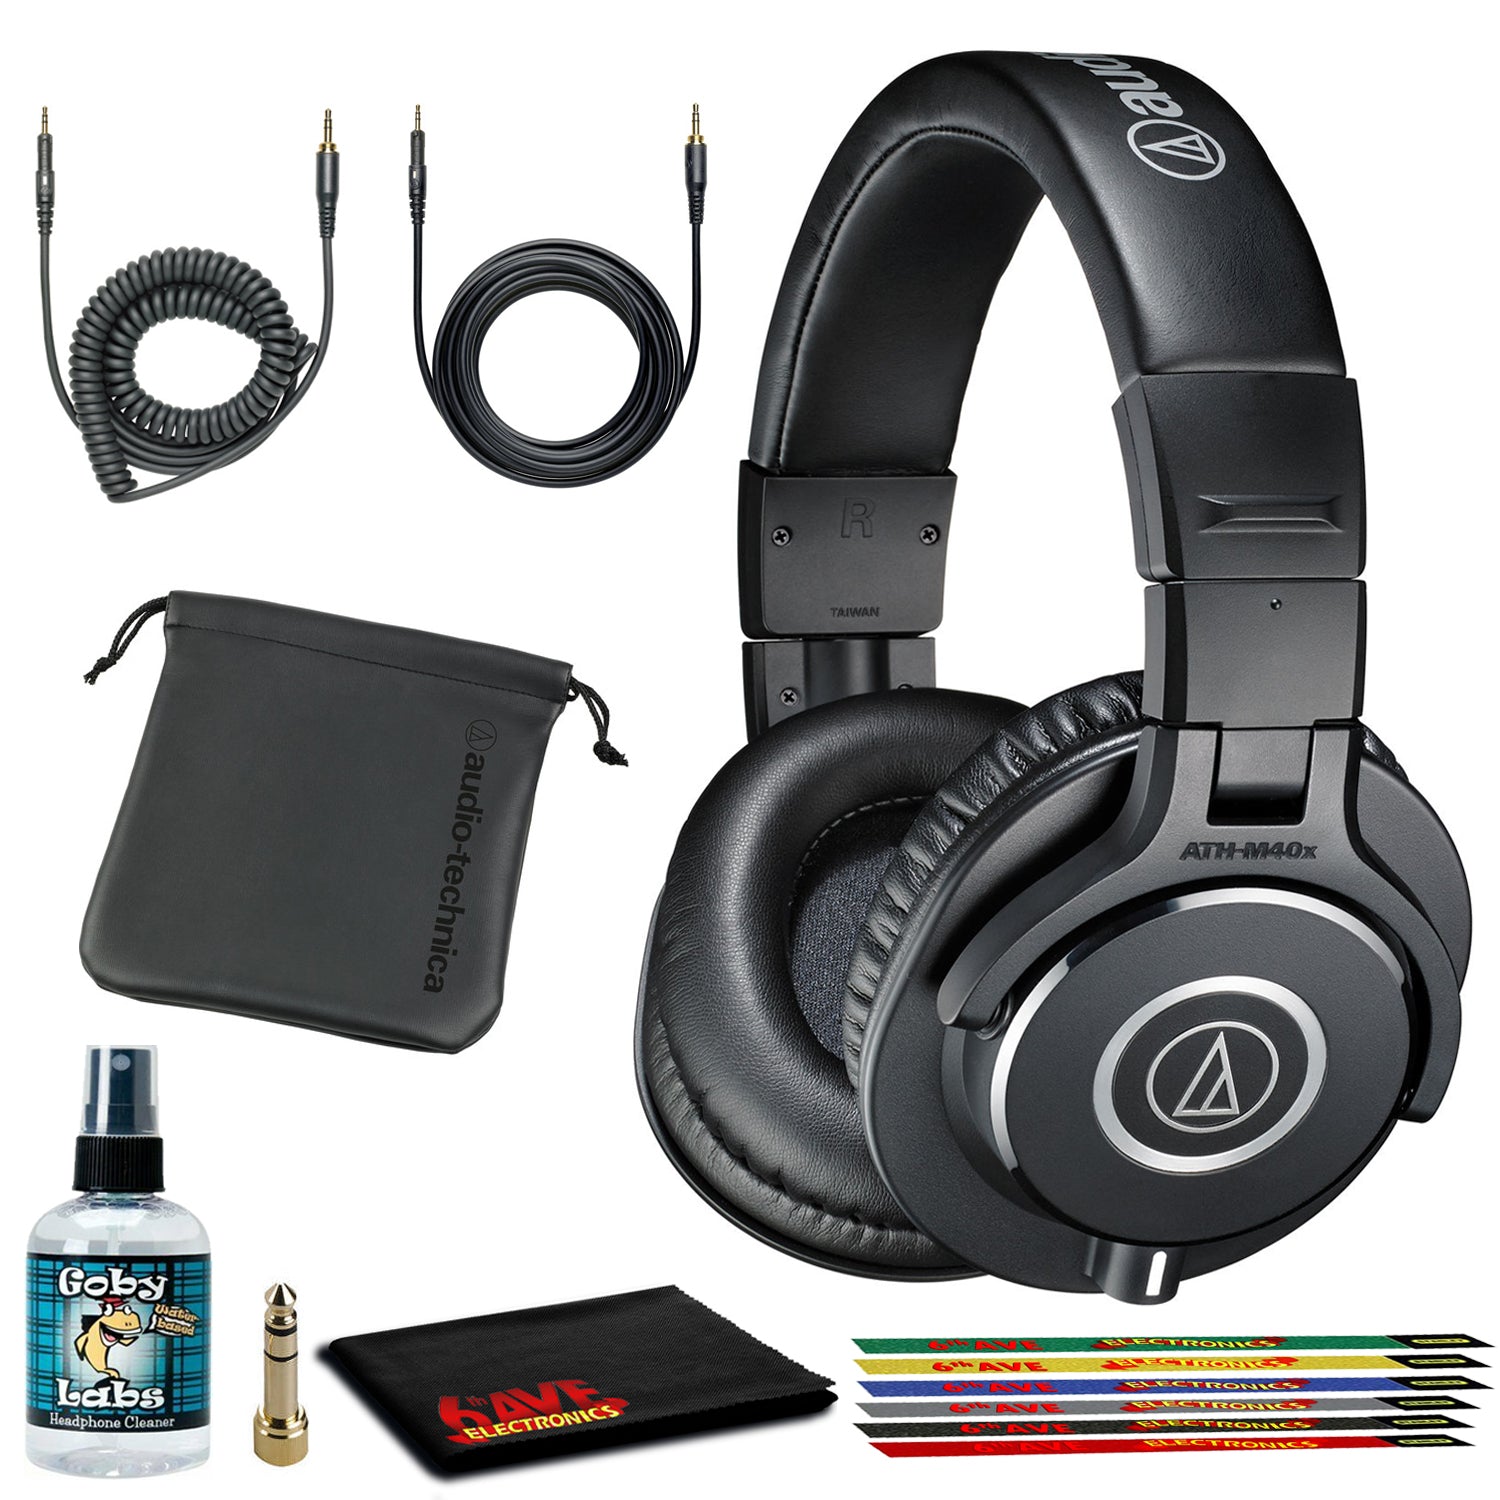 Audio-Technica ATH-M40x Closed Back Headphones with Cables and Cleaning Kit